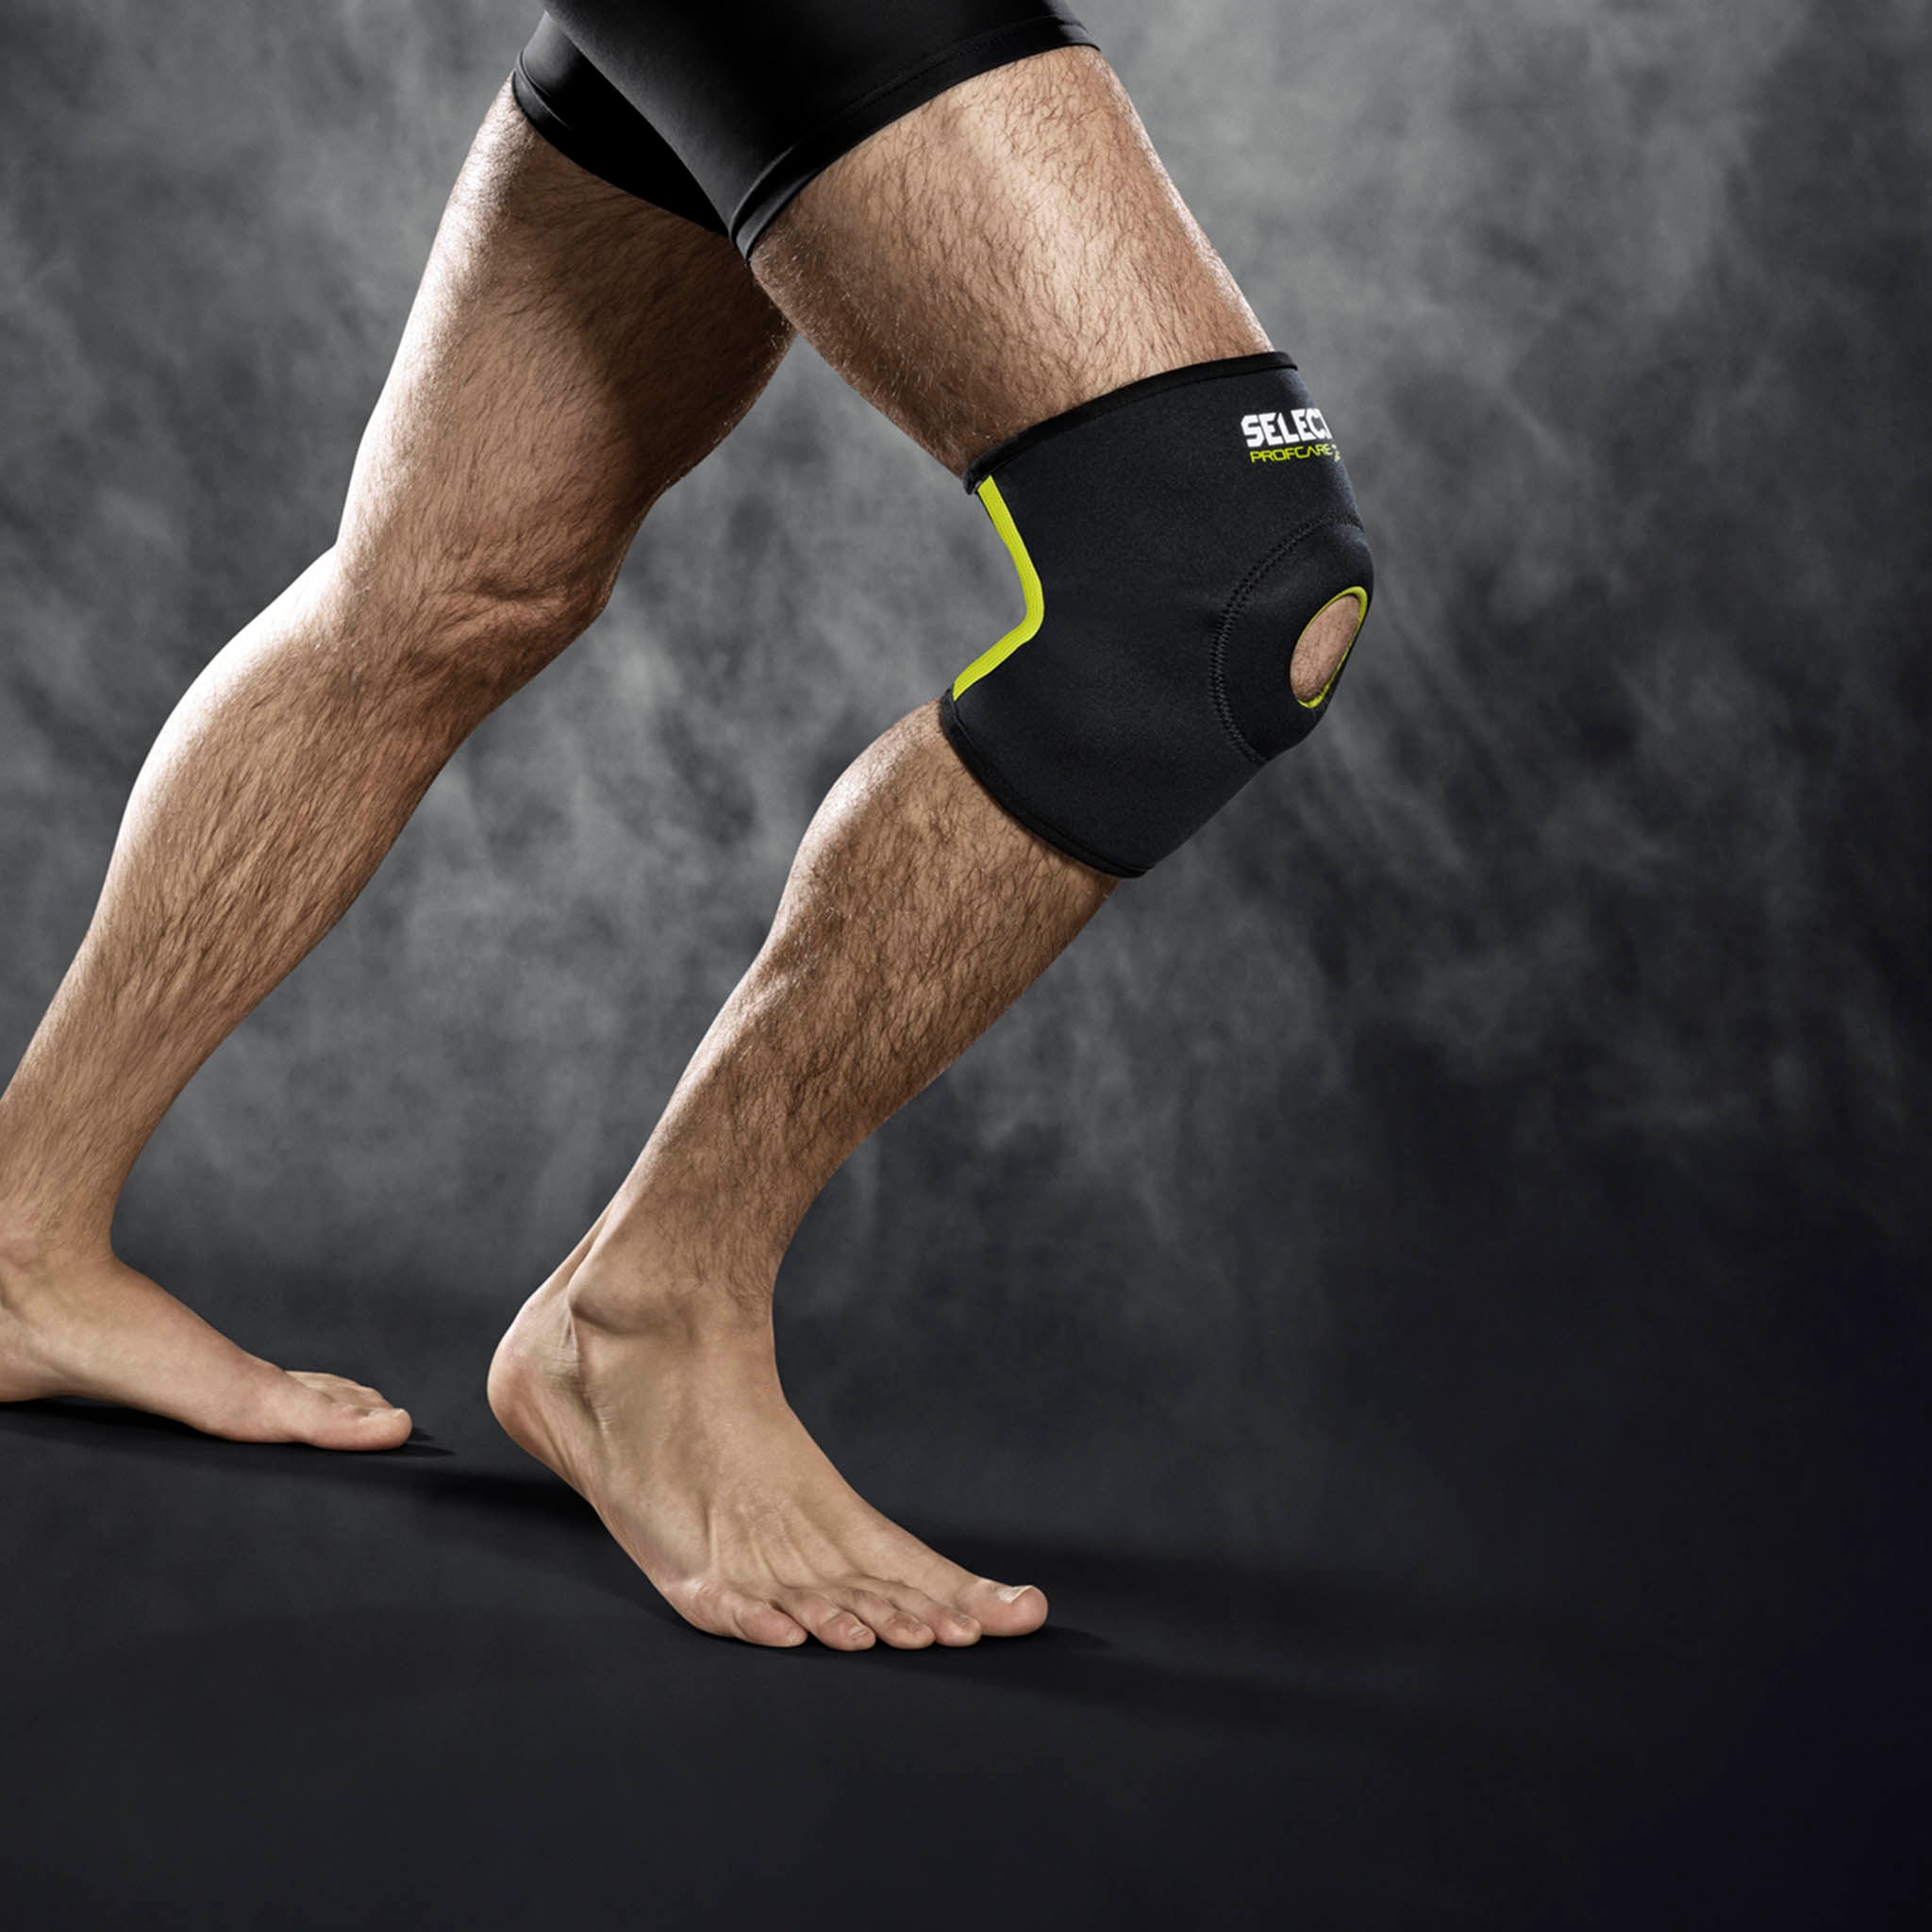 Knee support with hole